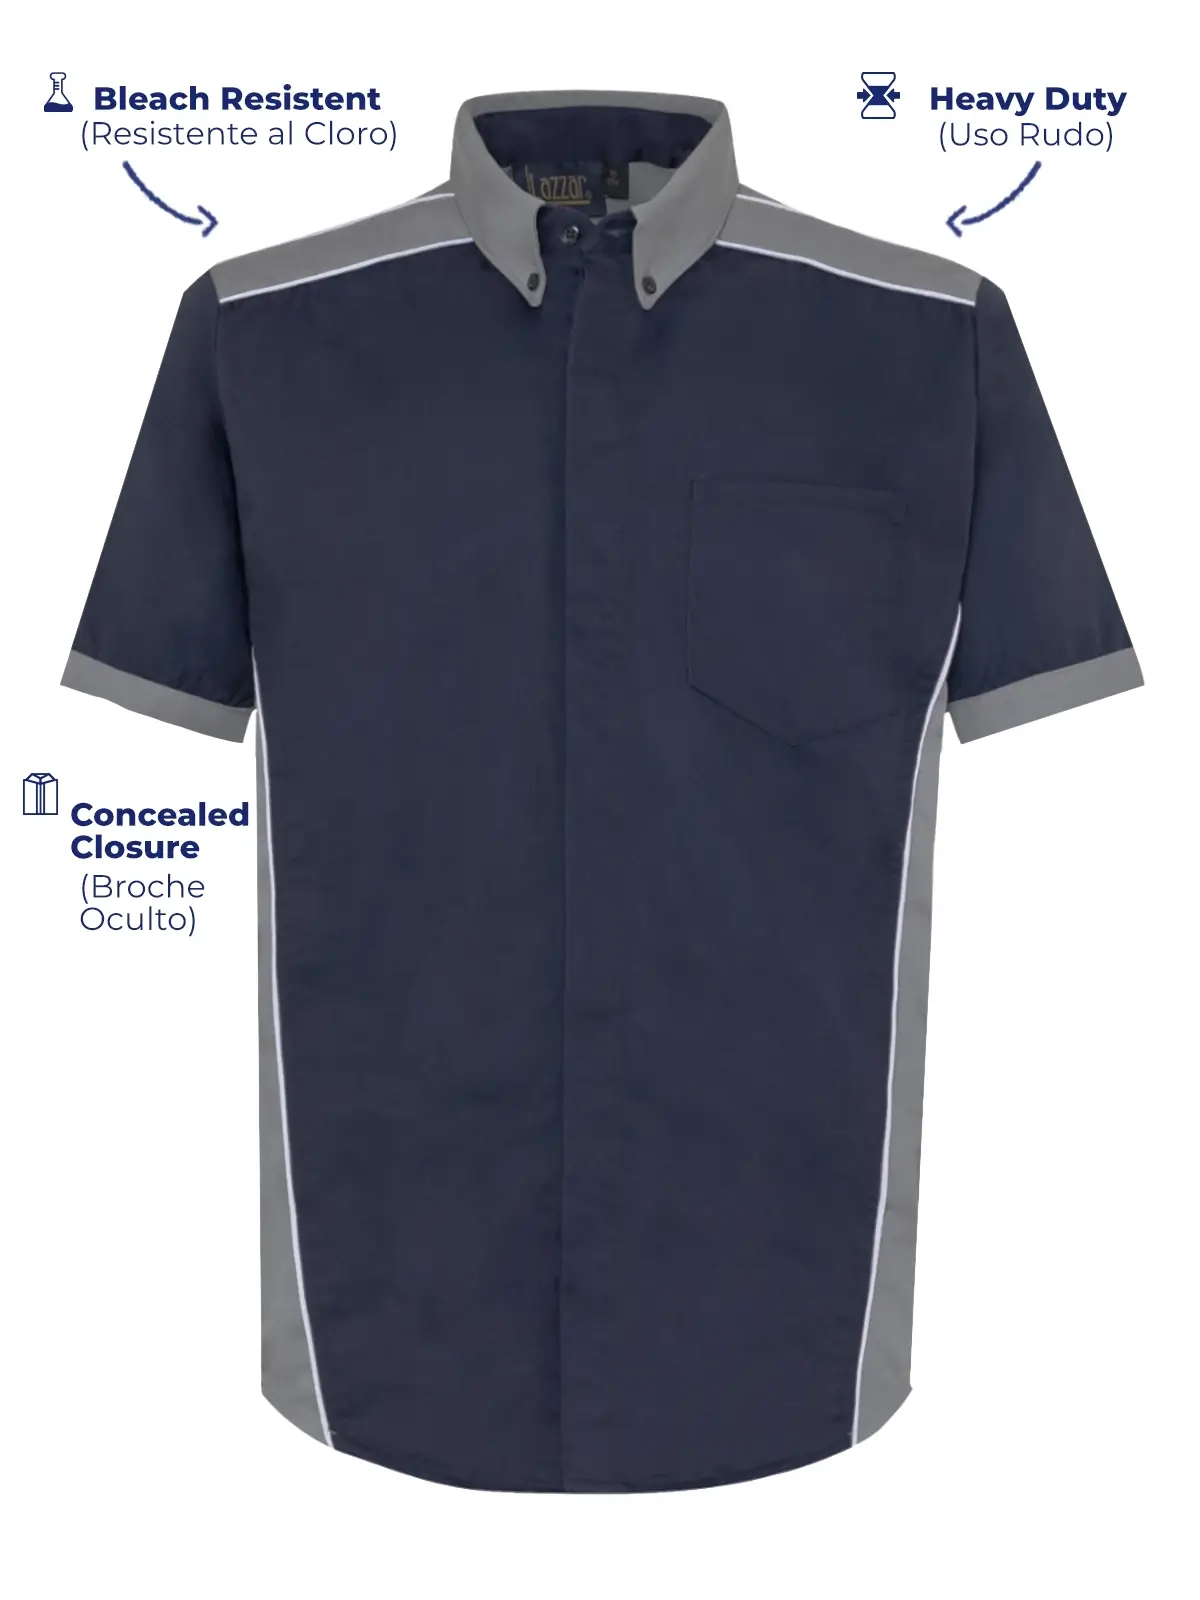 Navy blue industrial shirts